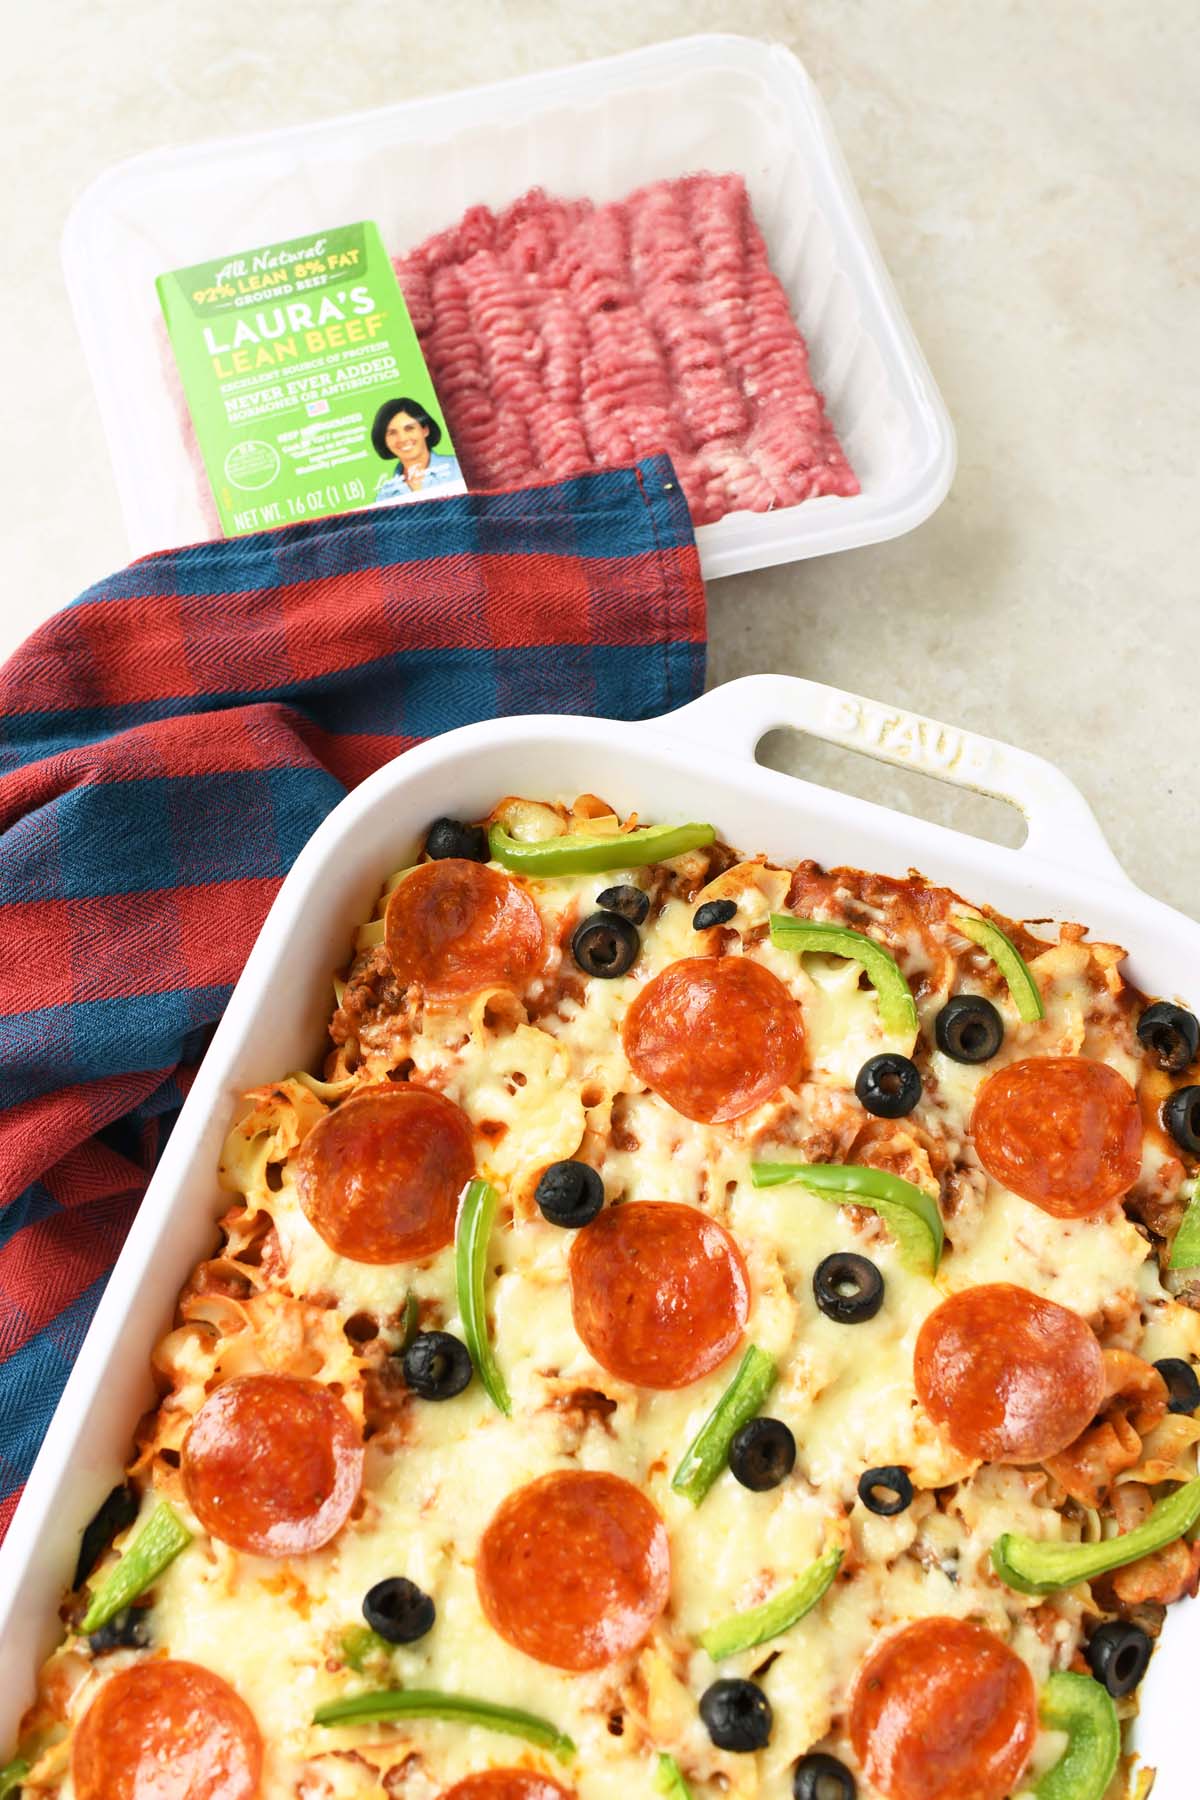 A cheesy and beefy baked pizza casserol near a package of Laura's Lean ground beef.